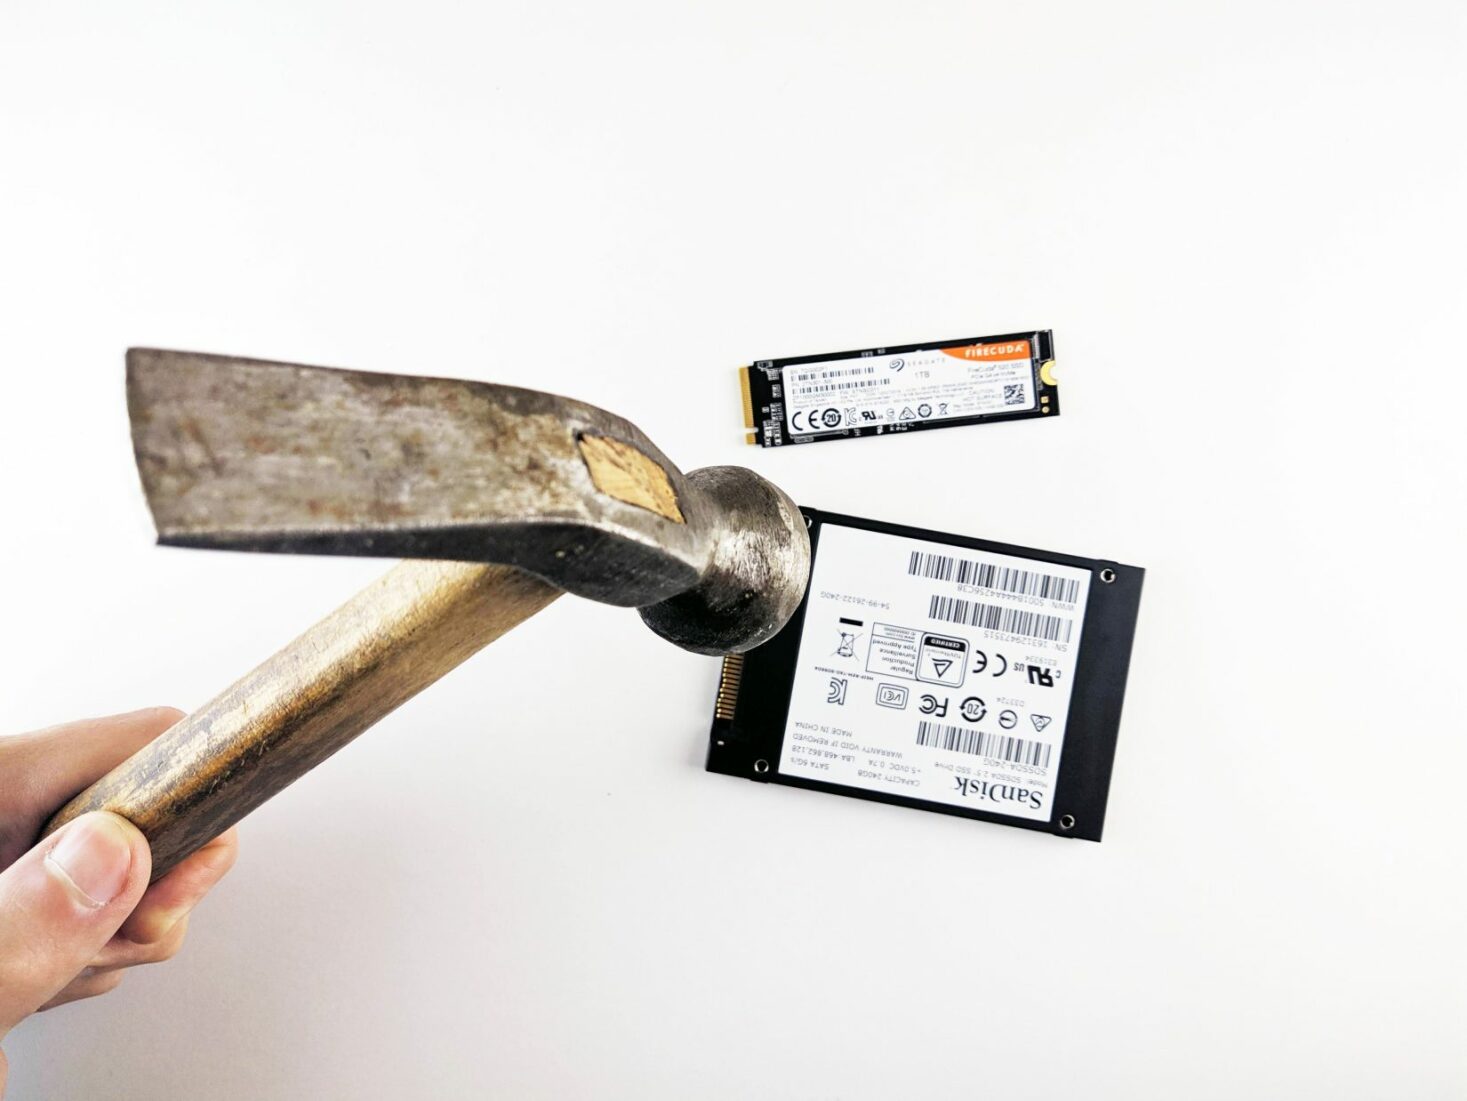 How to Permanently Destroy the Data on Your Old SSD Before Disposal